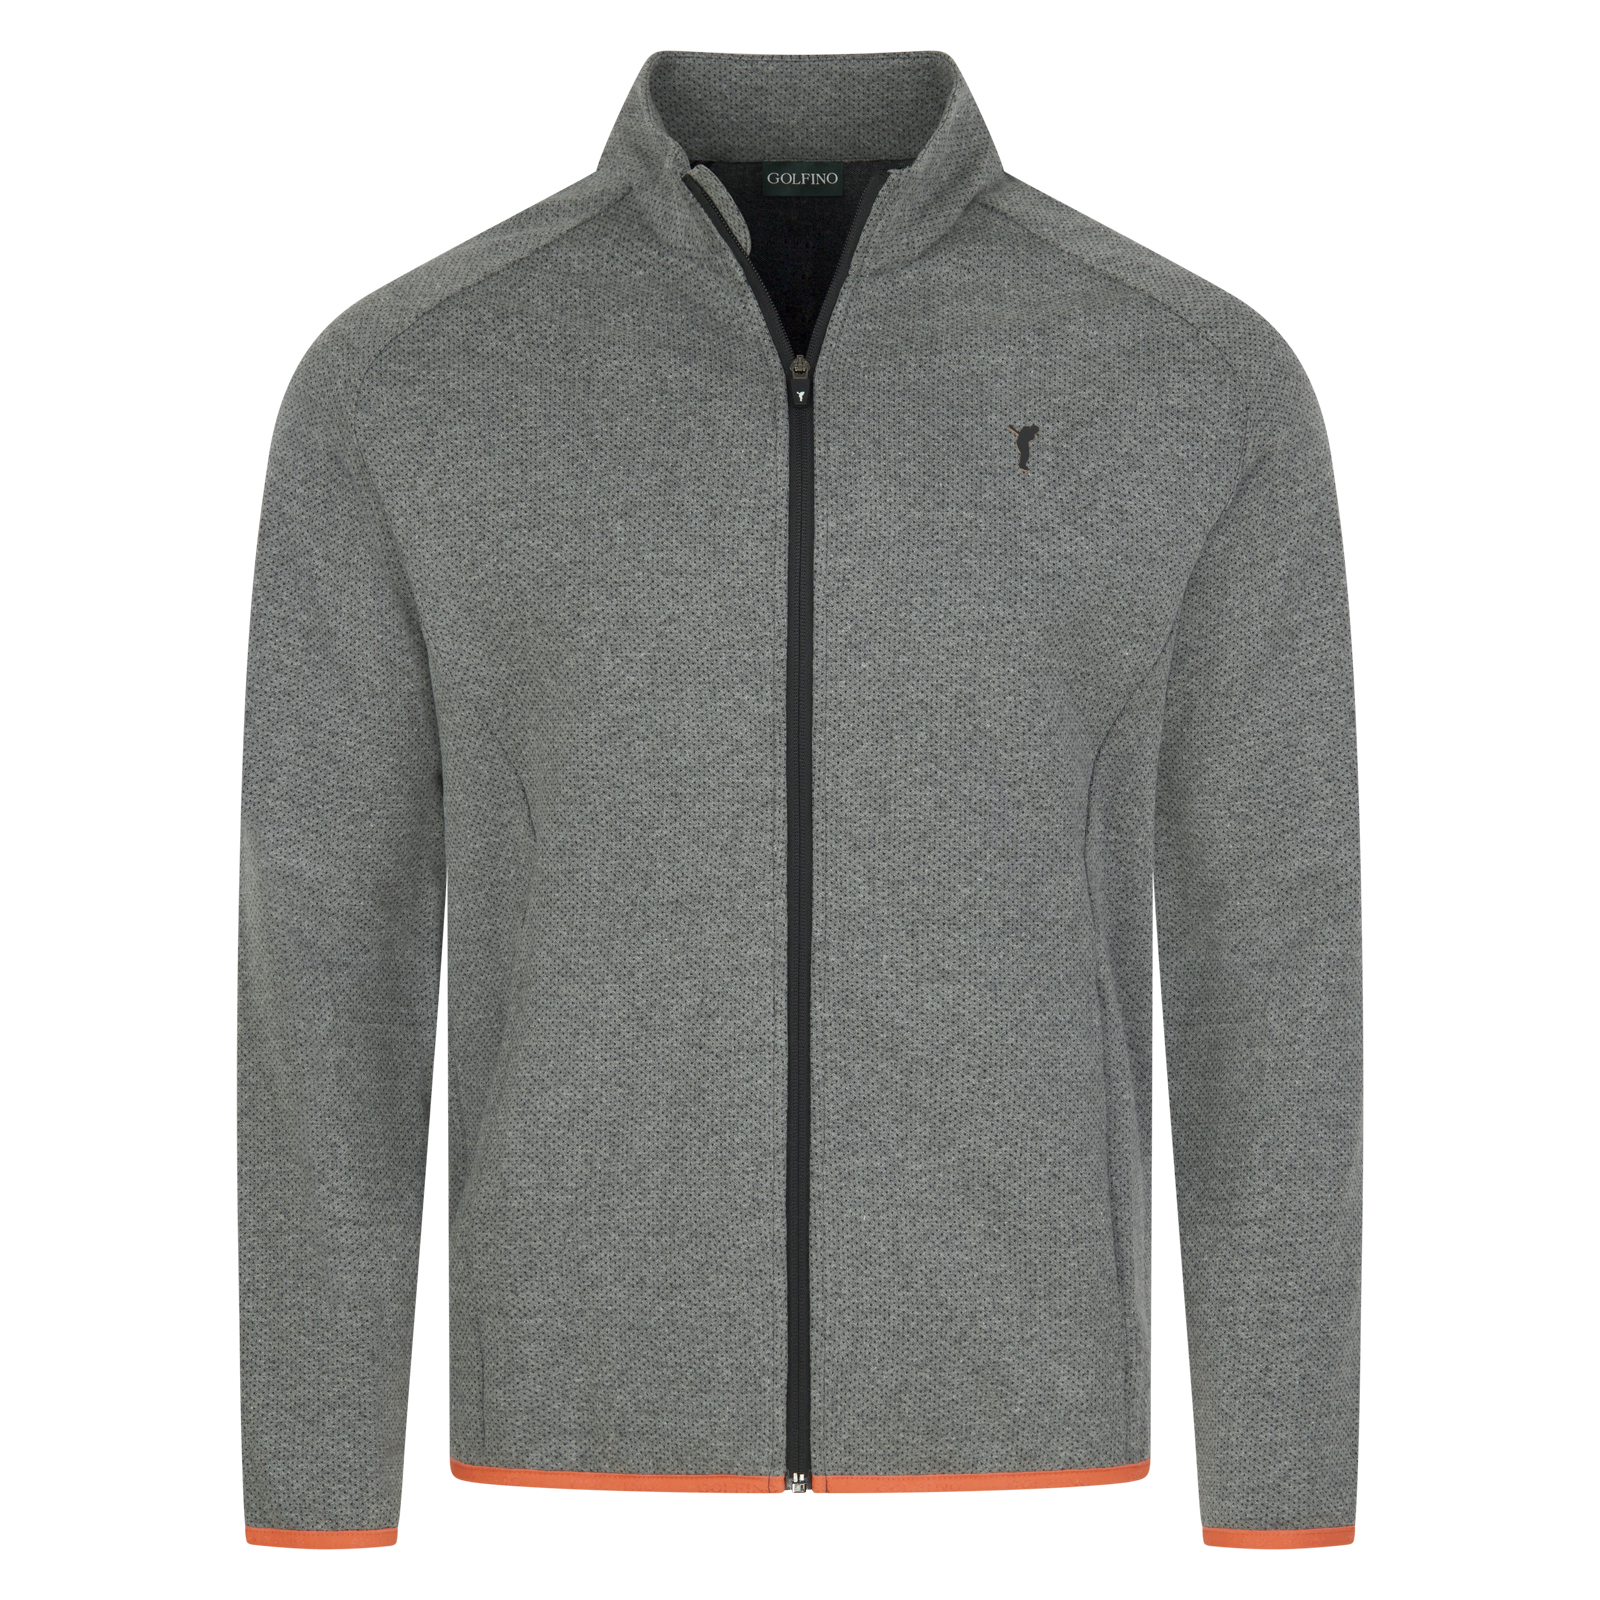 Men's sustainable golf jacket in stretch fabric with viscose